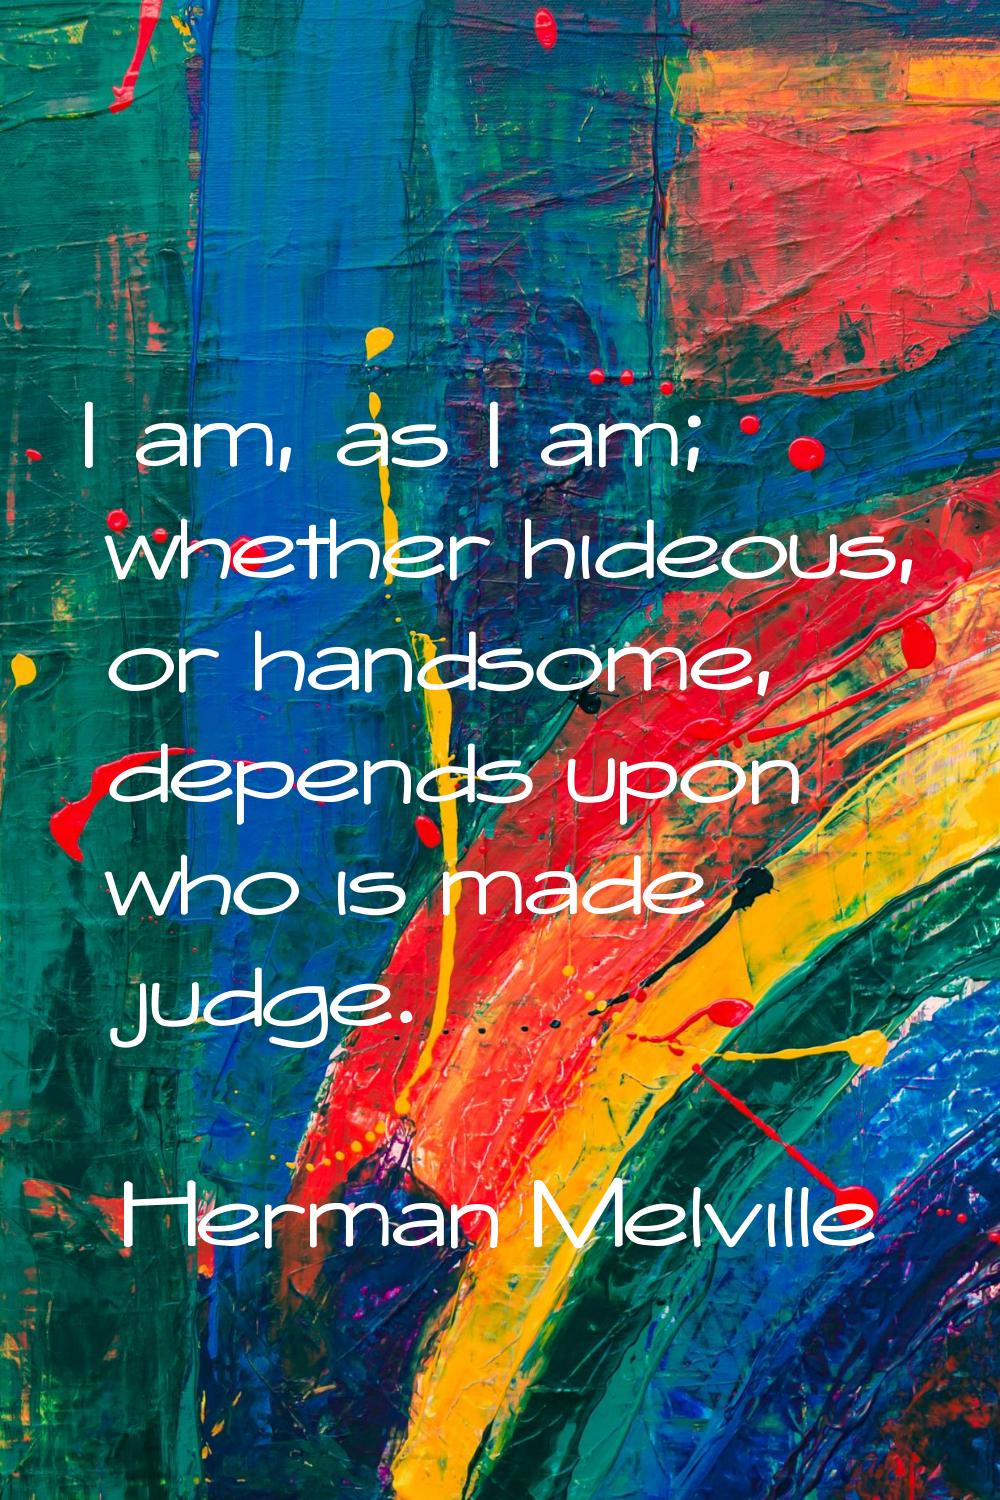 I am, as I am; whether hideous, or handsome, depends upon who is made judge.